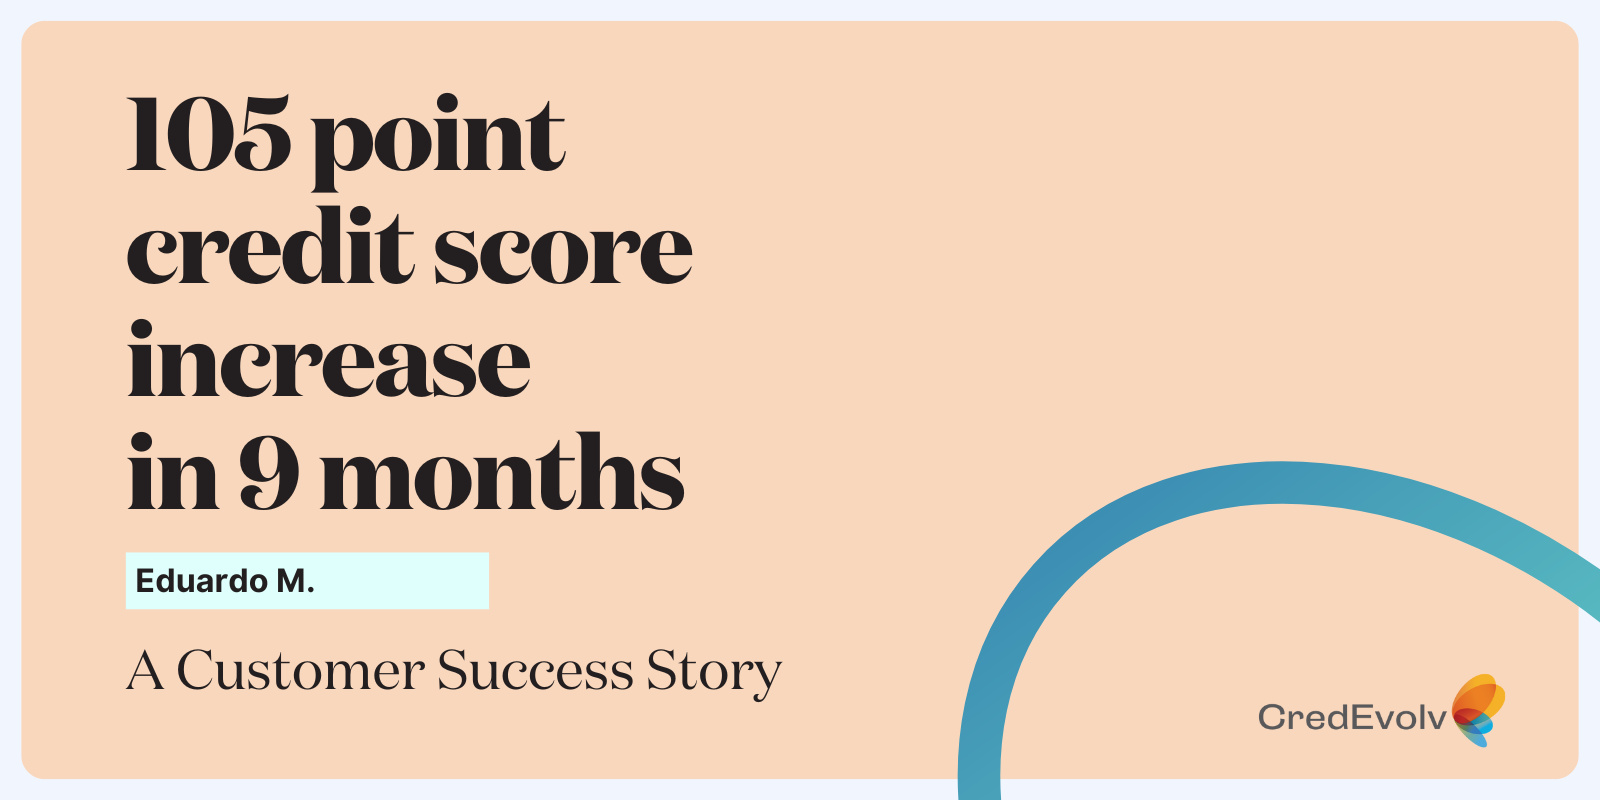 Credit Success Story - 105 point credit score increase in 9 months - blog graphic